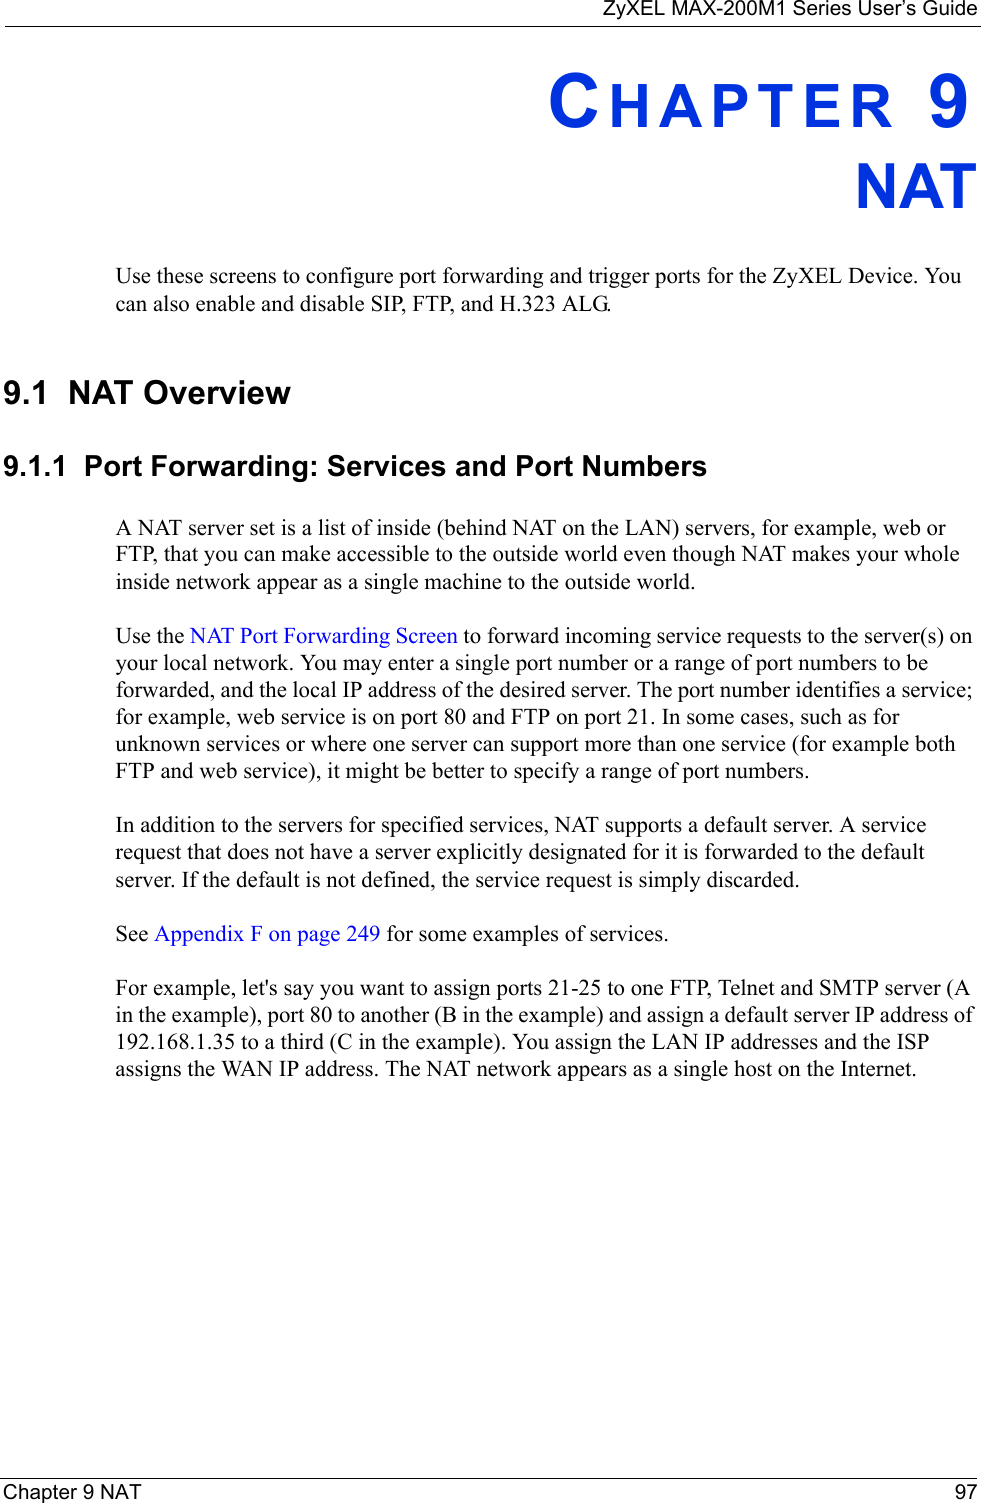 ZyXEL MAX-200M1 Series User’s GuideChapter 9 NAT 97CHAPTER 9NATUse these screens to configure port forwarding and trigger ports for the ZyXEL Device. You can also enable and disable SIP, FTP, and H.323 ALG.9.1  NAT Overview9.1.1  Port Forwarding: Services and Port NumbersA NAT server set is a list of inside (behind NAT on the LAN) servers, for example, web or FTP, that you can make accessible to the outside world even though NAT makes your whole inside network appear as a single machine to the outside world.Use the NAT Port Forwarding Screen to forward incoming service requests to the server(s) on your local network. You may enter a single port number or a range of port numbers to be forwarded, and the local IP address of the desired server. The port number identifies a service; for example, web service is on port 80 and FTP on port 21. In some cases, such as for unknown services or where one server can support more than one service (for example both FTP and web service), it might be better to specify a range of port numbers. In addition to the servers for specified services, NAT supports a default server. A service request that does not have a server explicitly designated for it is forwarded to the default server. If the default is not defined, the service request is simply discarded.See Appendix F on page 249 for some examples of services.For example, let&apos;s say you want to assign ports 21-25 to one FTP, Telnet and SMTP server (A in the example), port 80 to another (B in the example) and assign a default server IP address of 192.168.1.35 to a third (C in the example). You assign the LAN IP addresses and the ISP assigns the WAN IP address. The NAT network appears as a single host on the Internet.